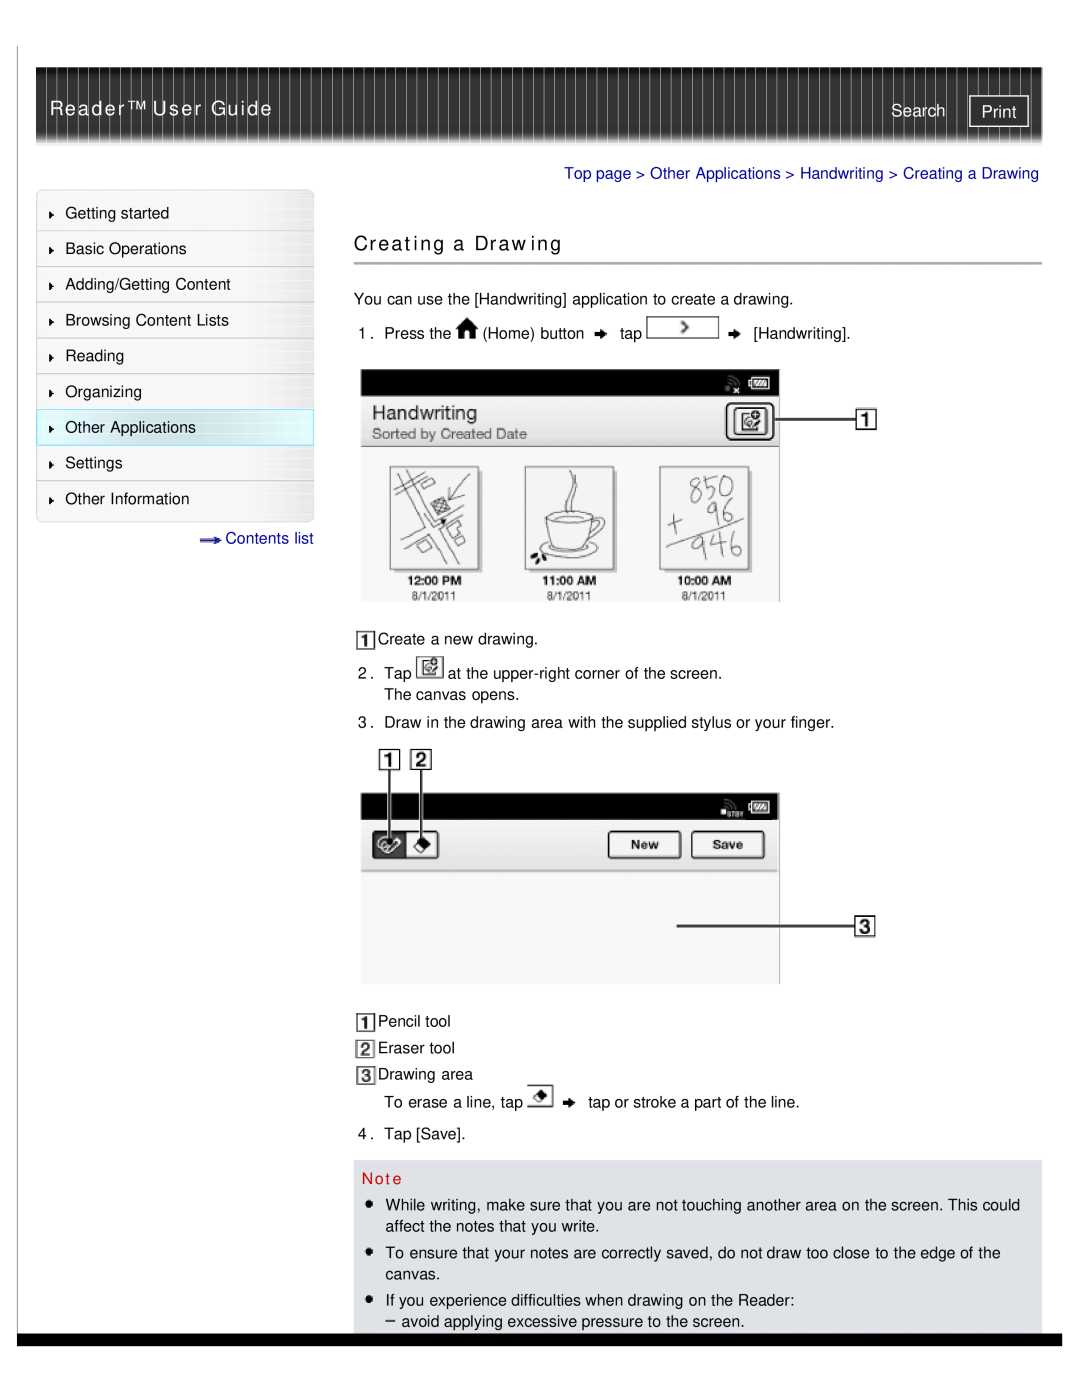 Sony PRS-T1RC, PRS-T1WC manual Creating a Drawing, Reader User Guide, Search, Print, Contents list 